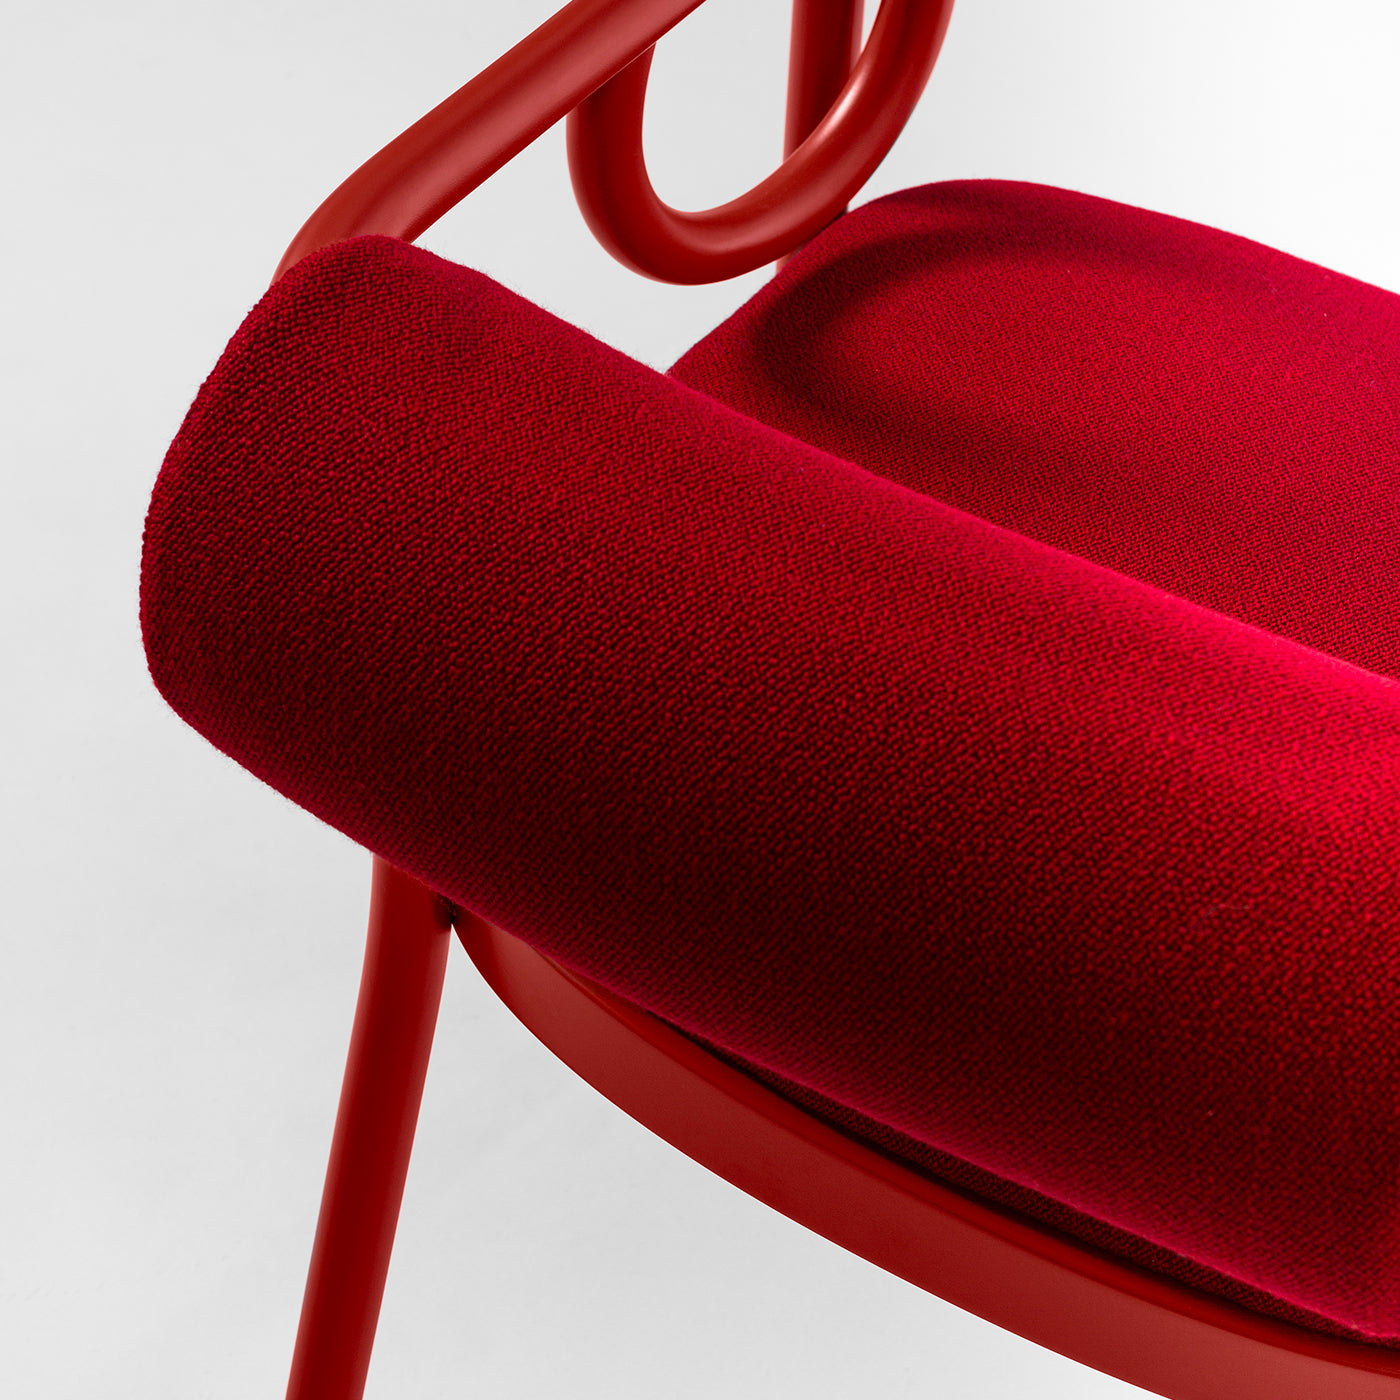 Loop Red Lounge Chair by India Mahdavi - Alternative view 5